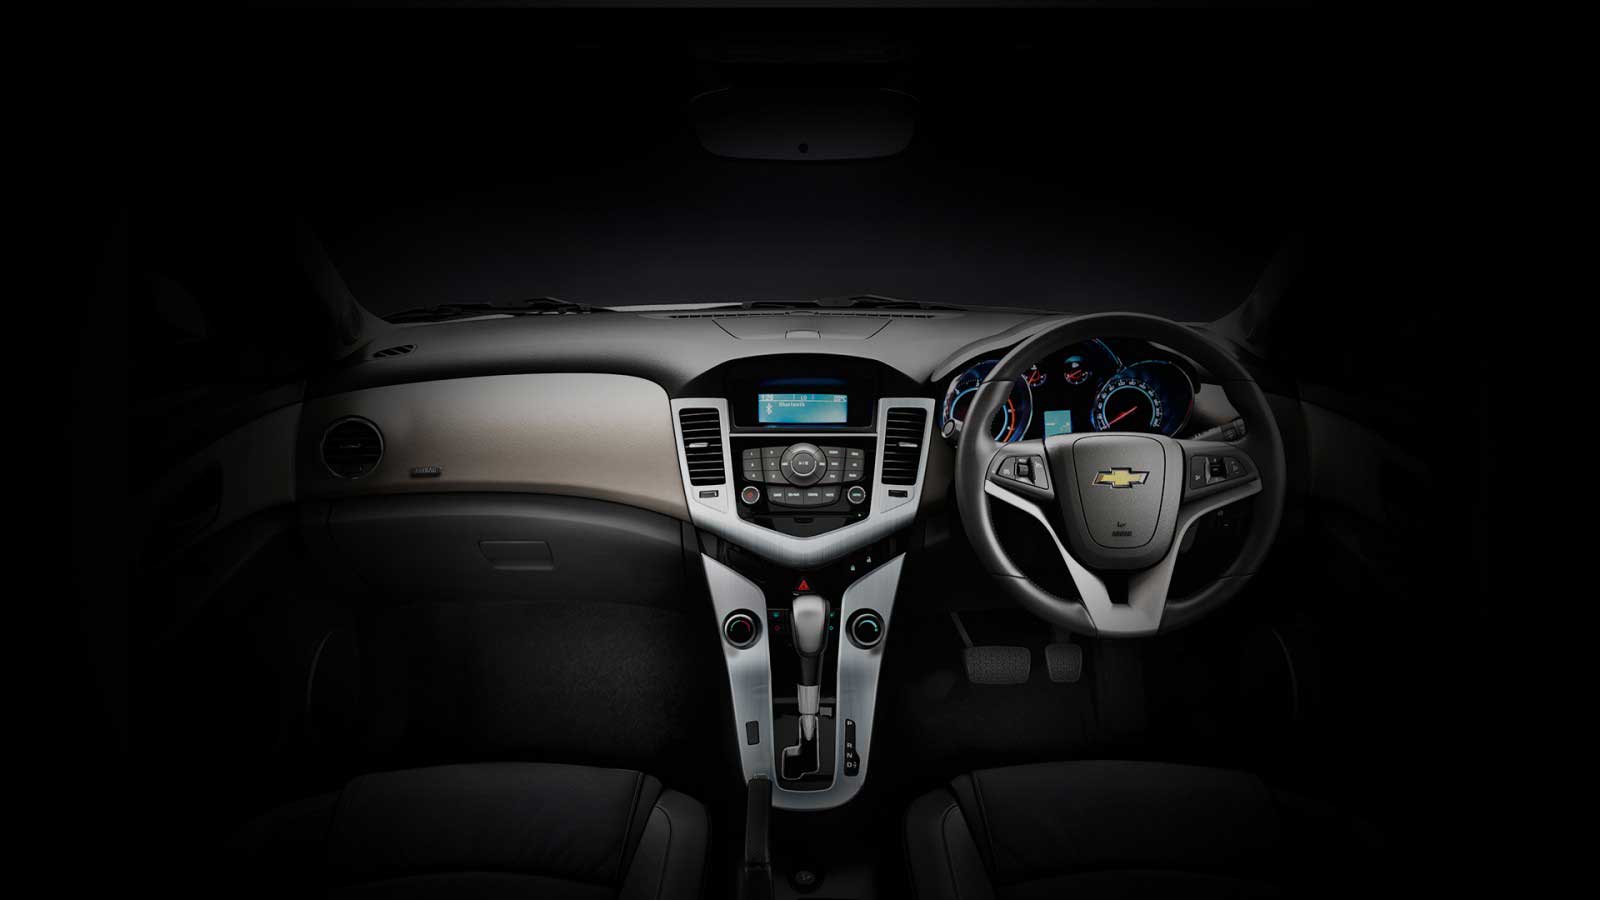 Chevrolet Cruze LTZ AT Interior front view and steering